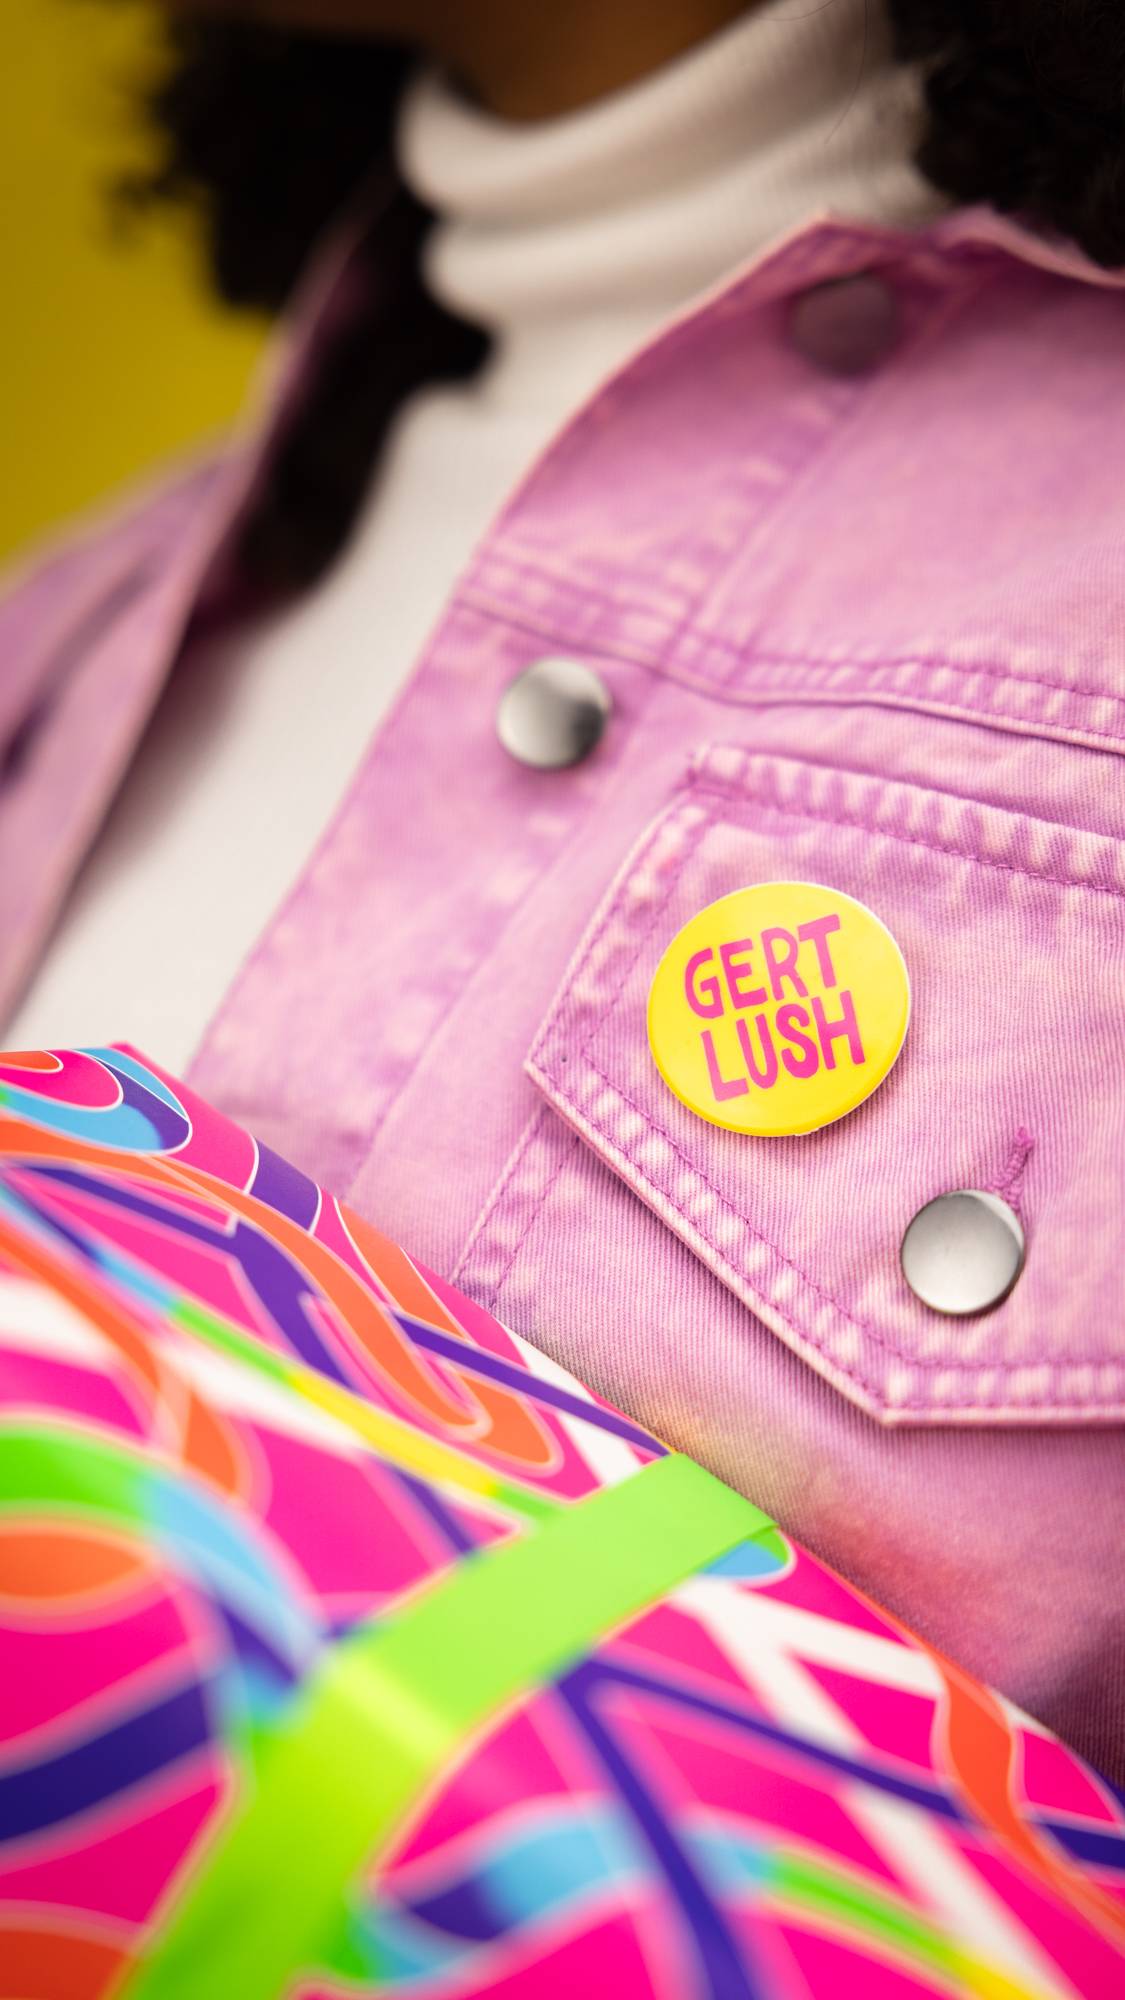 Image shows model wearing a fuchsia-coloured, denim jacket. A yellow, pinned badge shows the words "Gert Lush" written in pink.